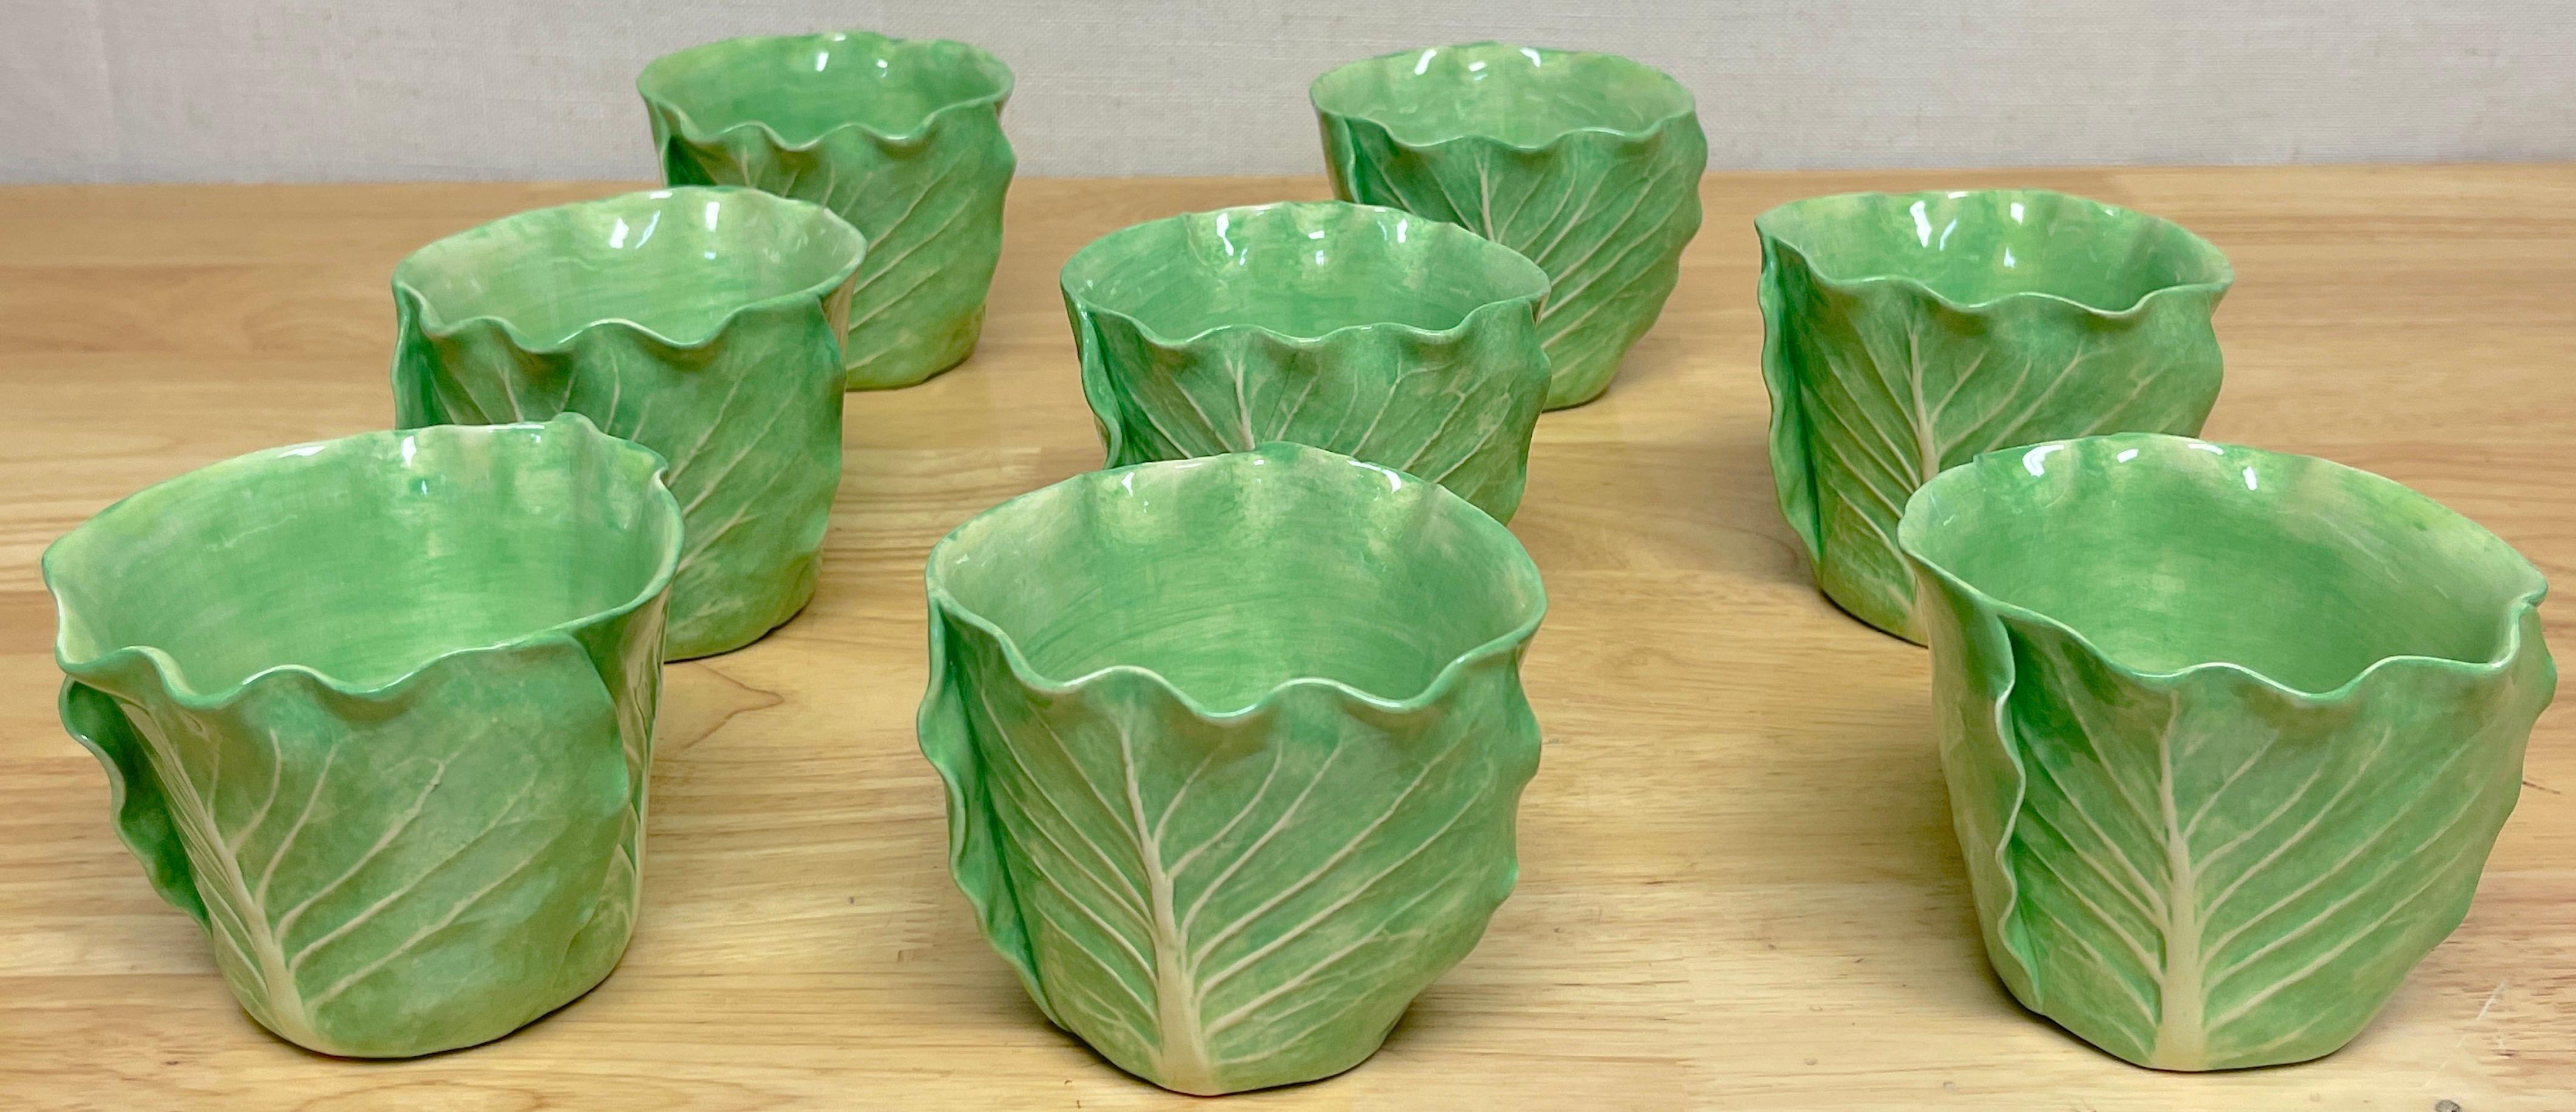 Dodie Thayer 'Jumbo' Lettuce Leaf Cup & Saucer, 5 Available, Sold Individually In Good Condition In West Palm Beach, FL